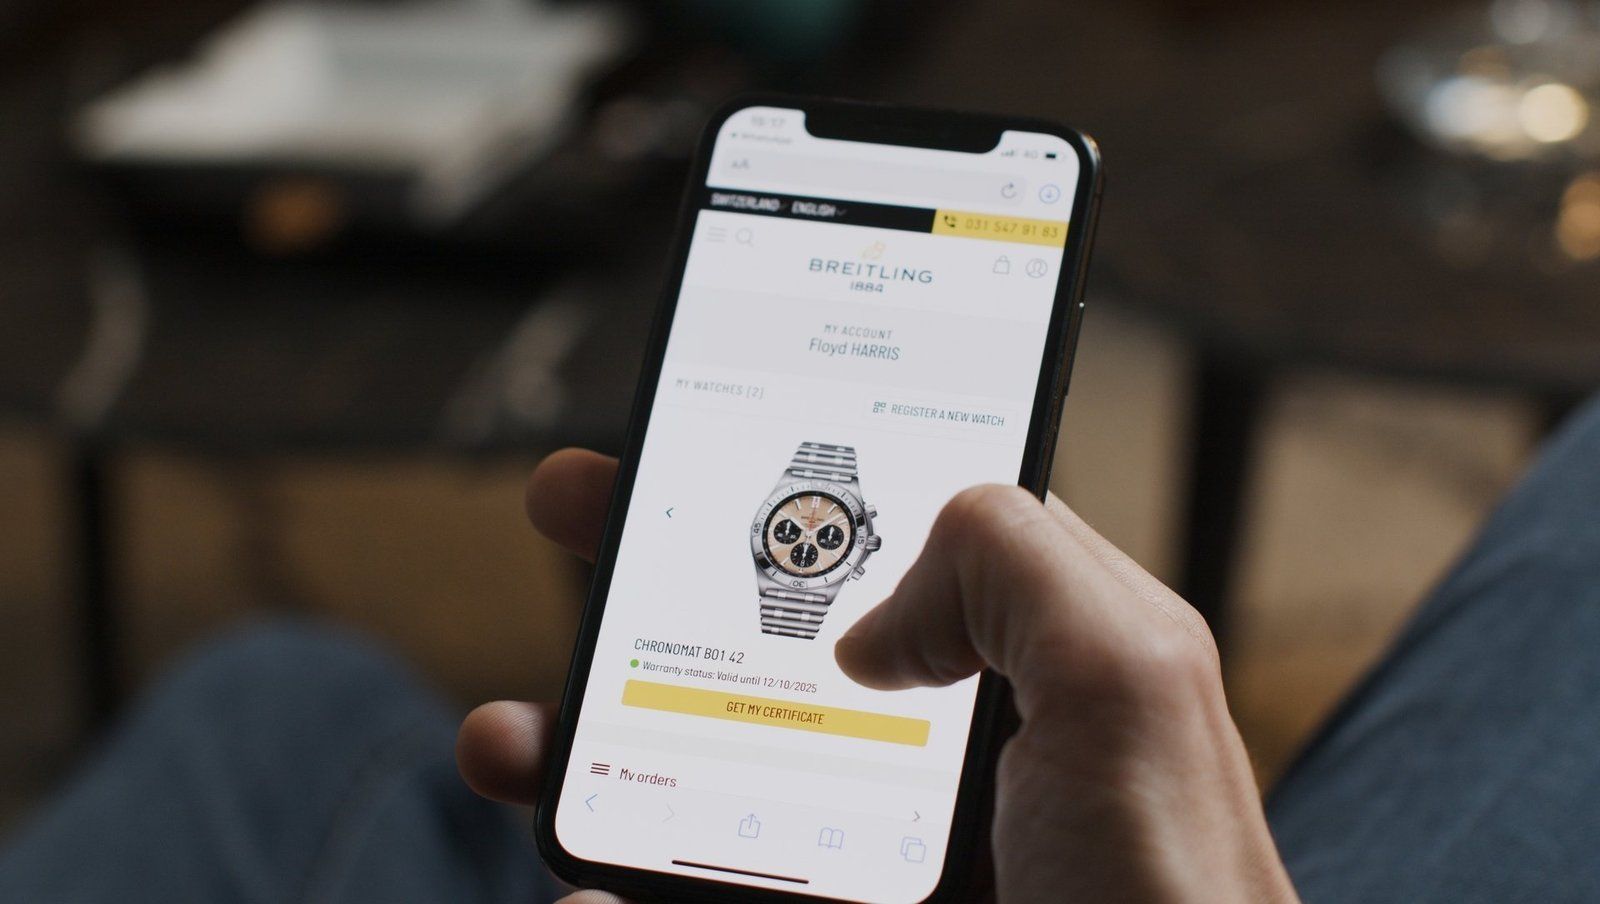 Since October 2020, all Breitling watches are accompanied by a blockchain-based digital passport to ensure their authenticity.